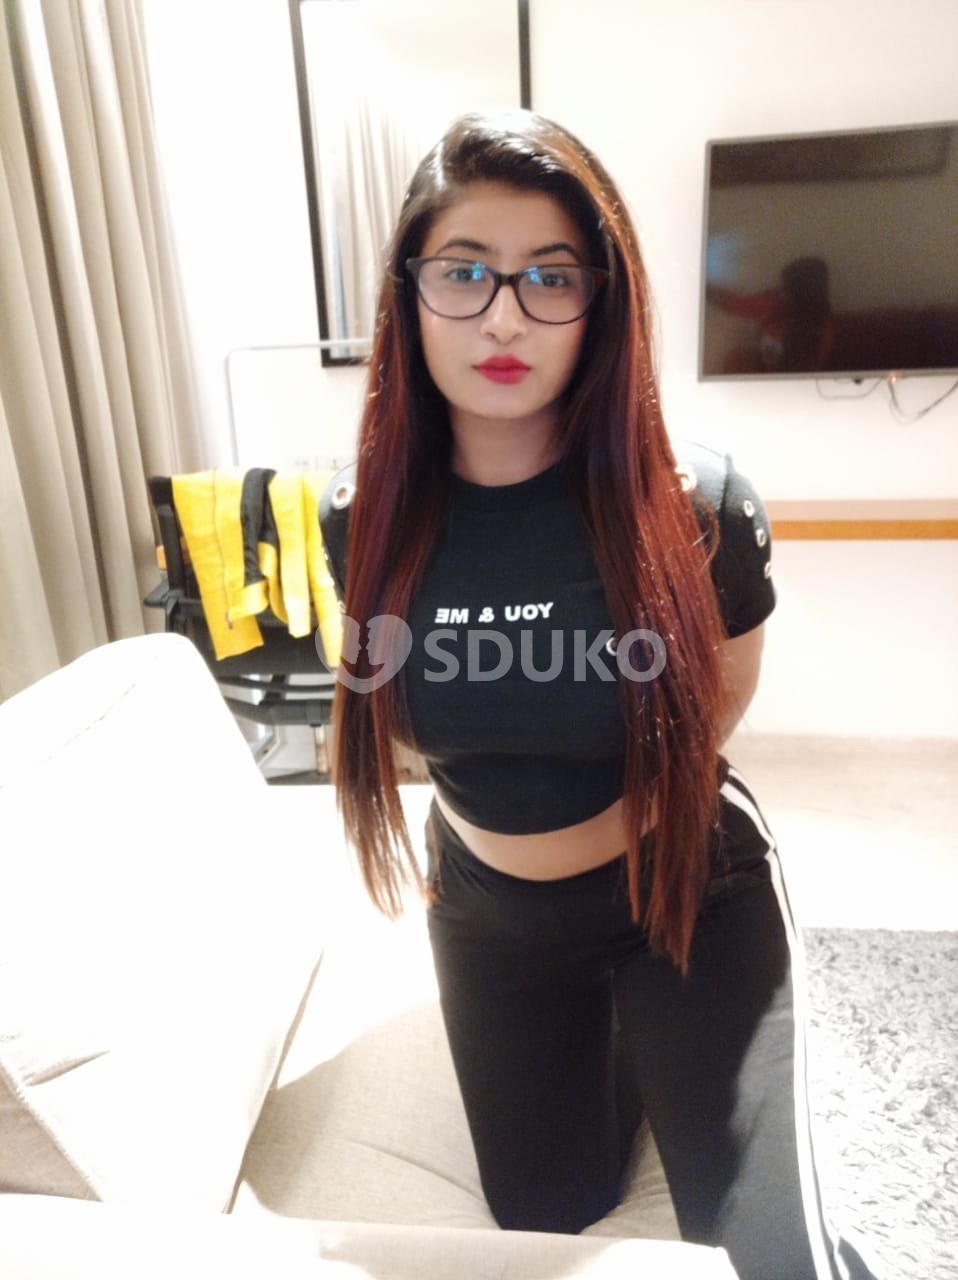 Nashik 👉 Low price 100%:::: genuine👥sexy VIP call girls are provided👌safe and secure service .call 📞